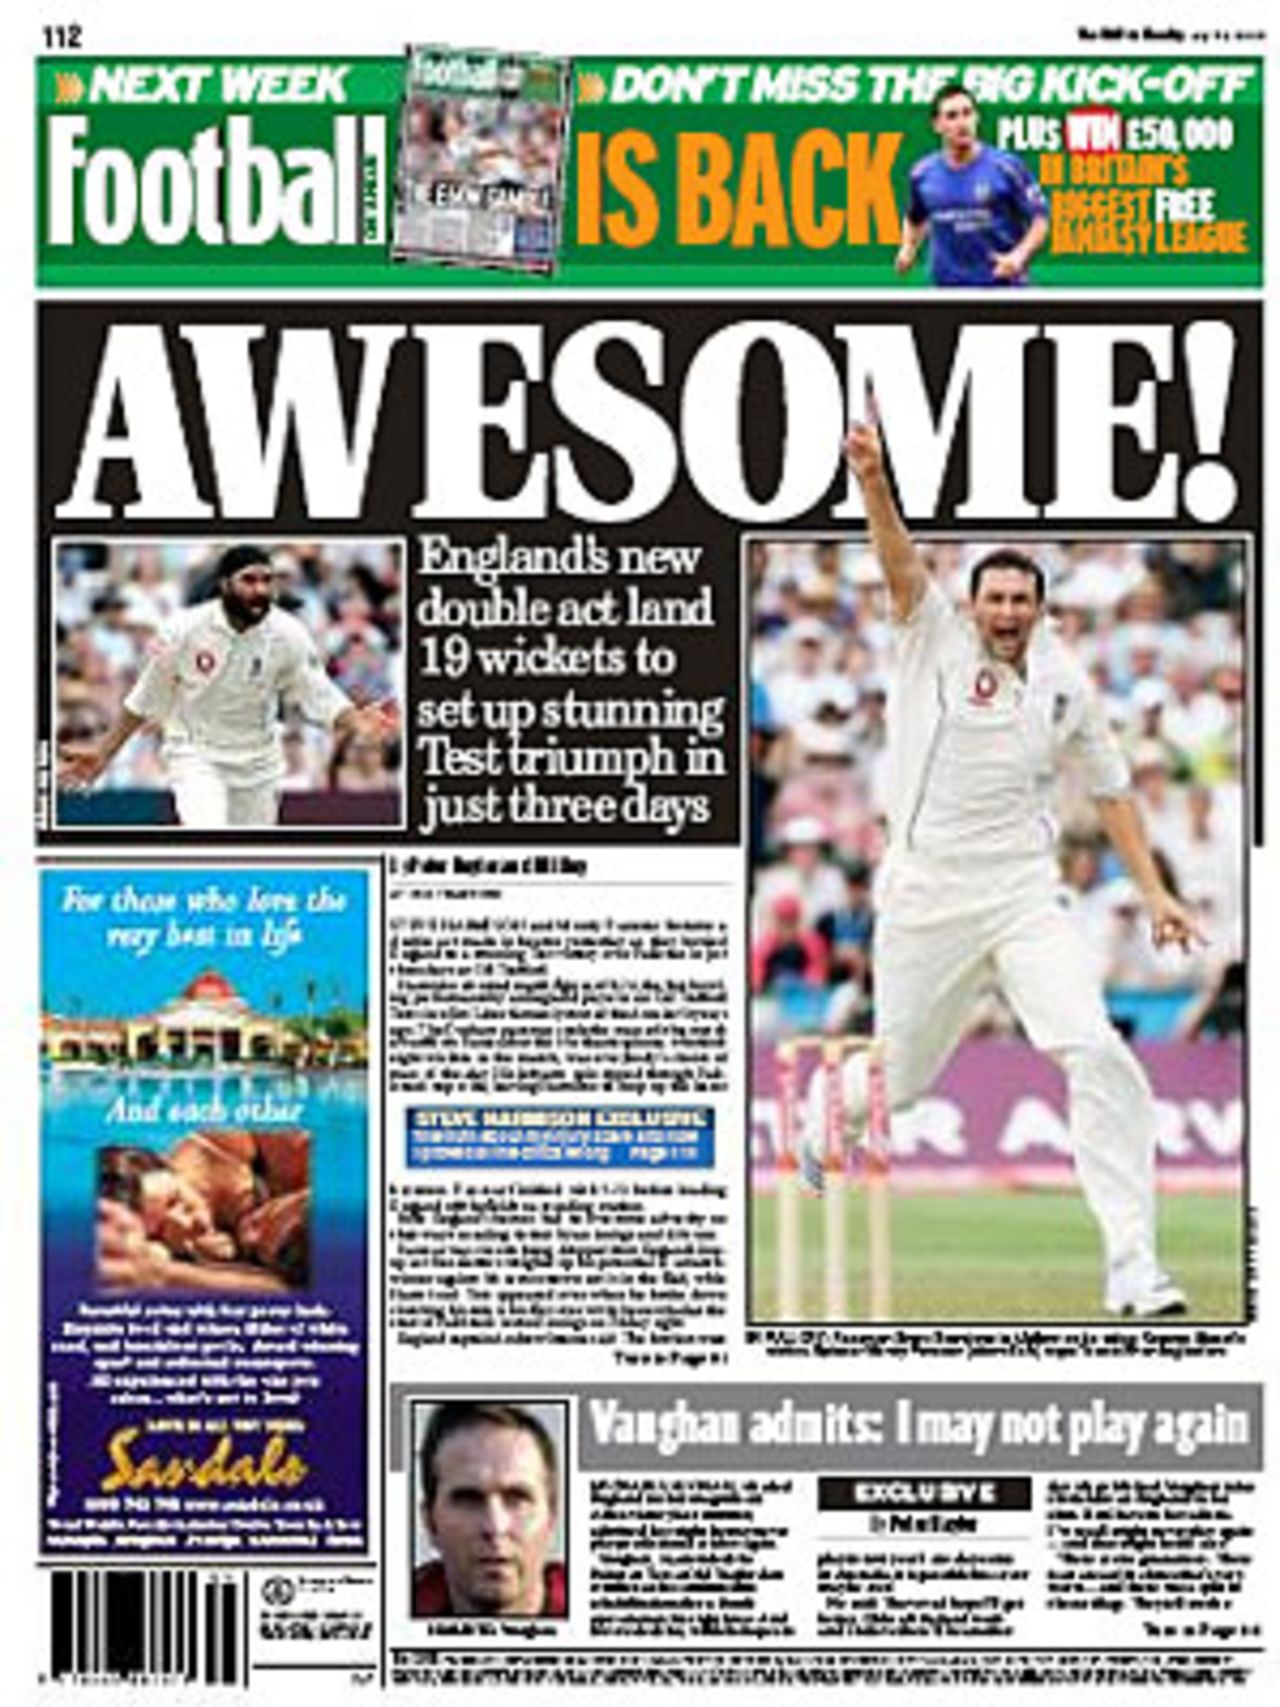 The back page of <I>The Mail On Sunday</I> following England's win over Pakistan at Old Trafford, July 30, 2006